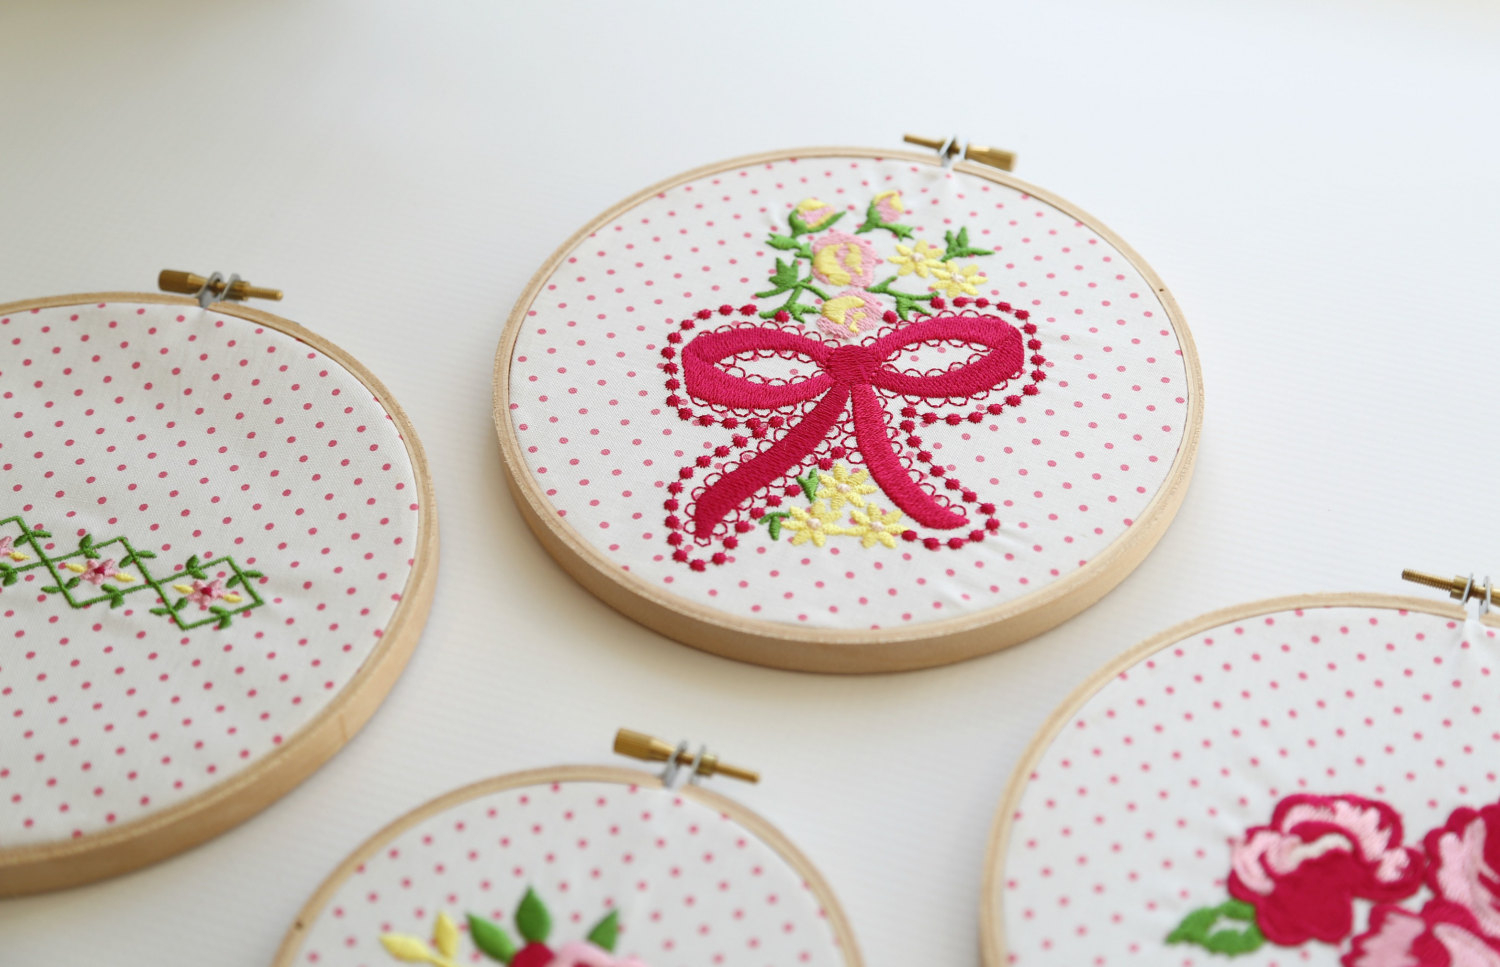 Sewing Machine Embroidery Patterns Dainty Darling Machine Embroidery Designs From The Cottage Mama